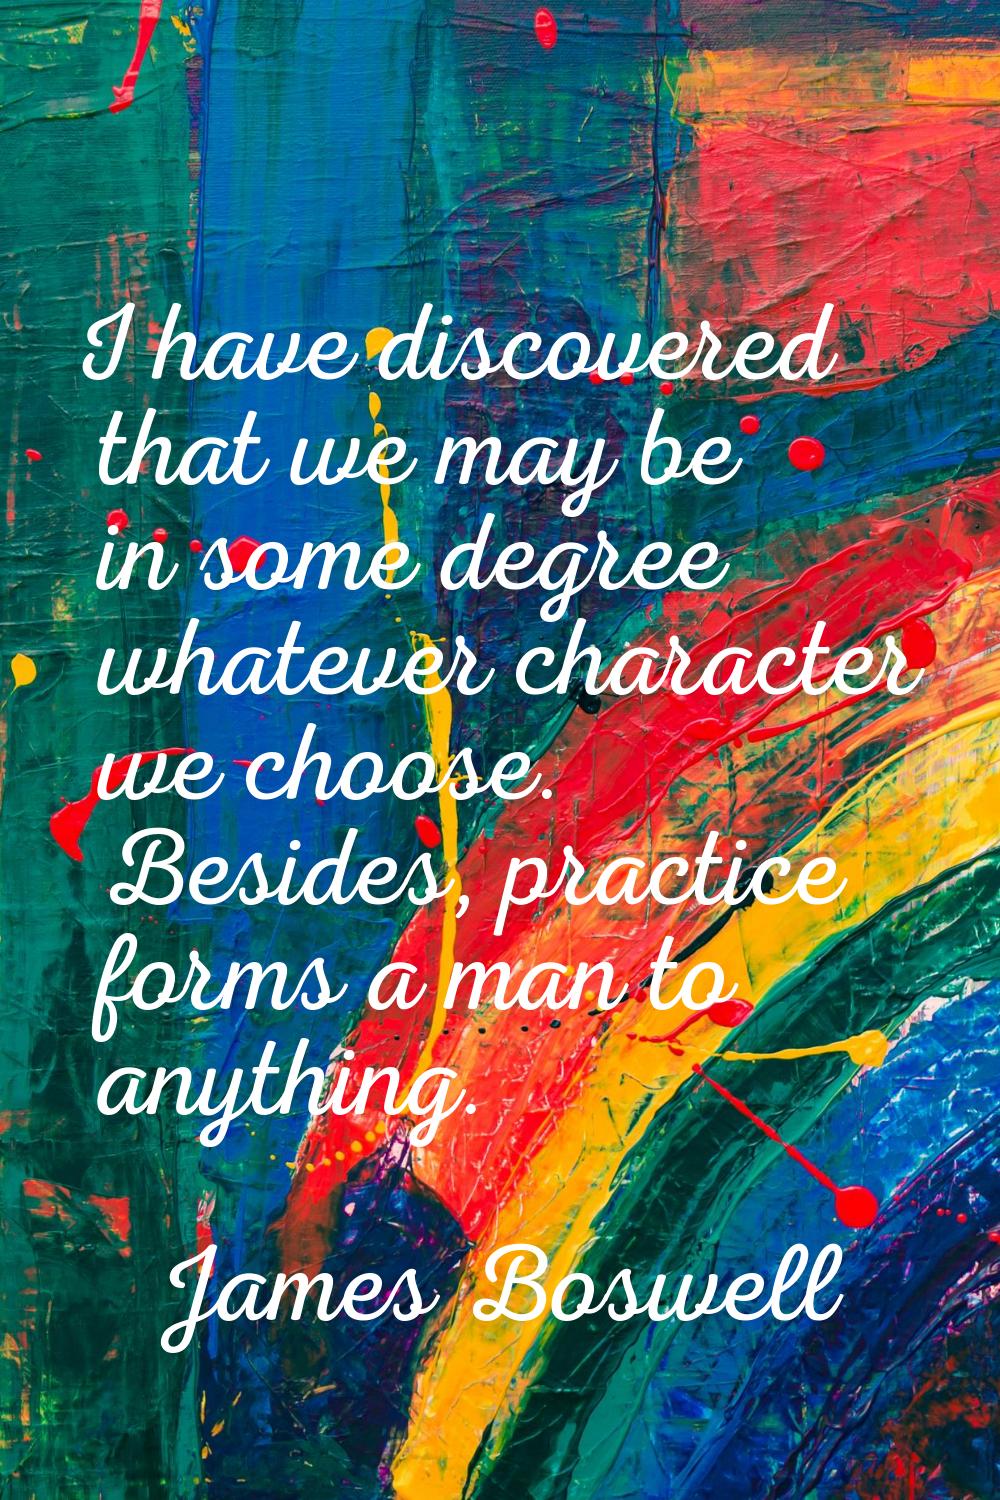 I have discovered that we may be in some degree whatever character we choose. Besides, practice for